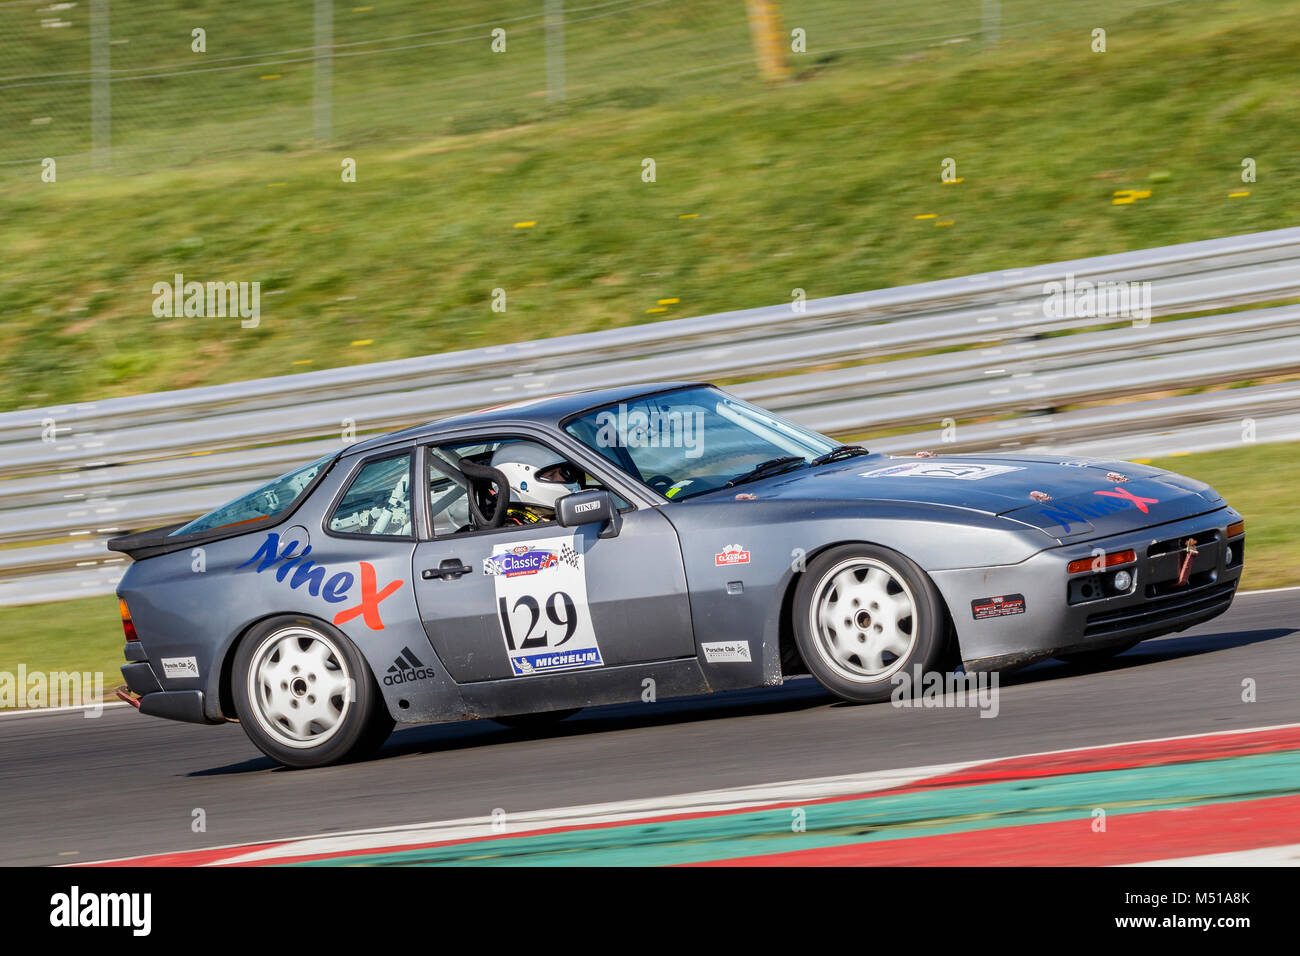 1989 Porsche 944 S2 with driver Charles Maclean during the CSCC Advantage Motorsport Future Classics race at Snetterton Motor Circuit, Norfolk, UK. Stock Photo